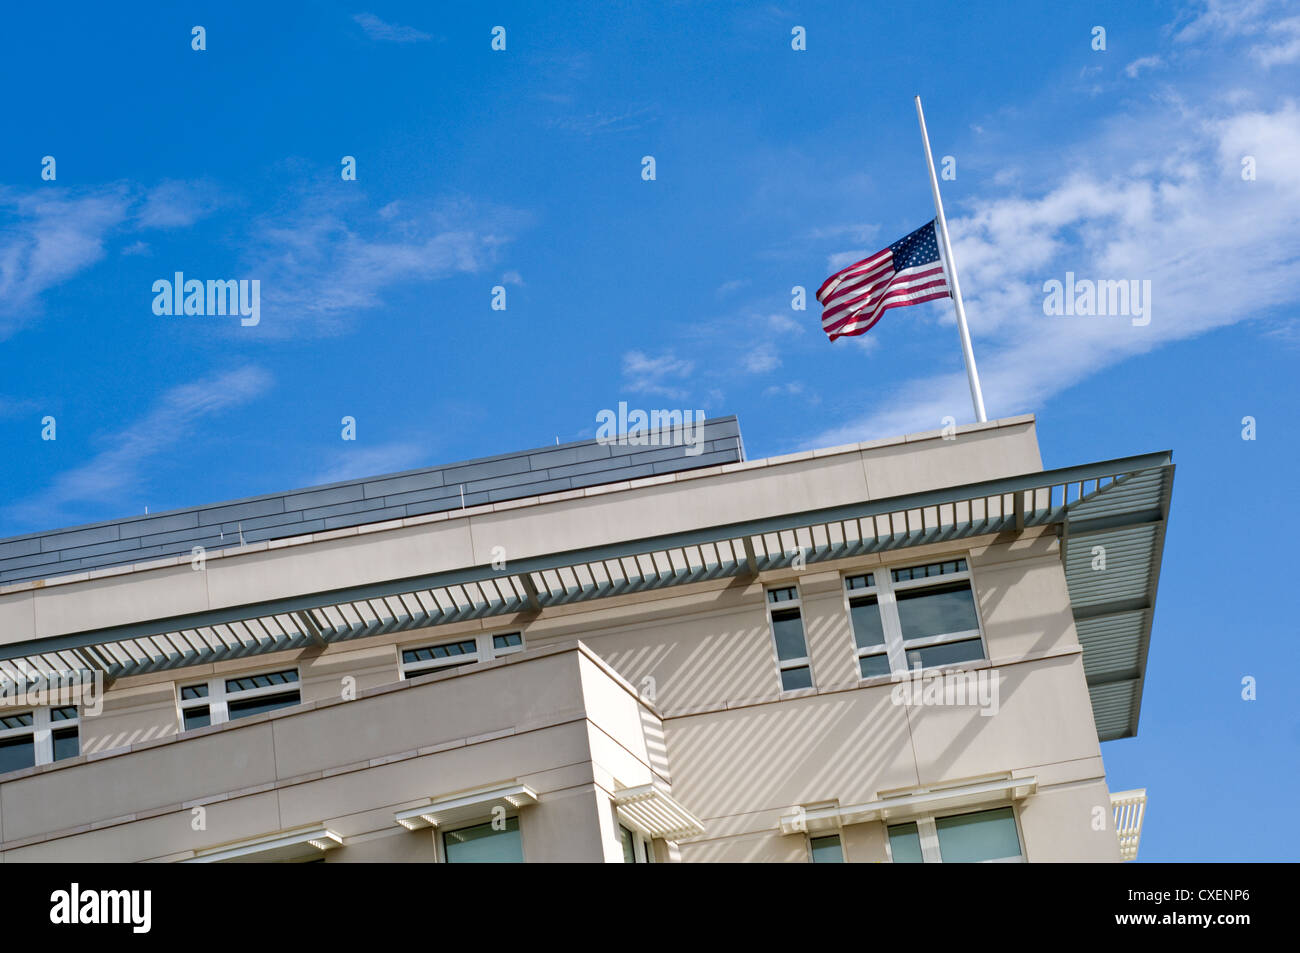 The American flag flying at half mast over the US Embassy in Berlin, Germany Stock Photo